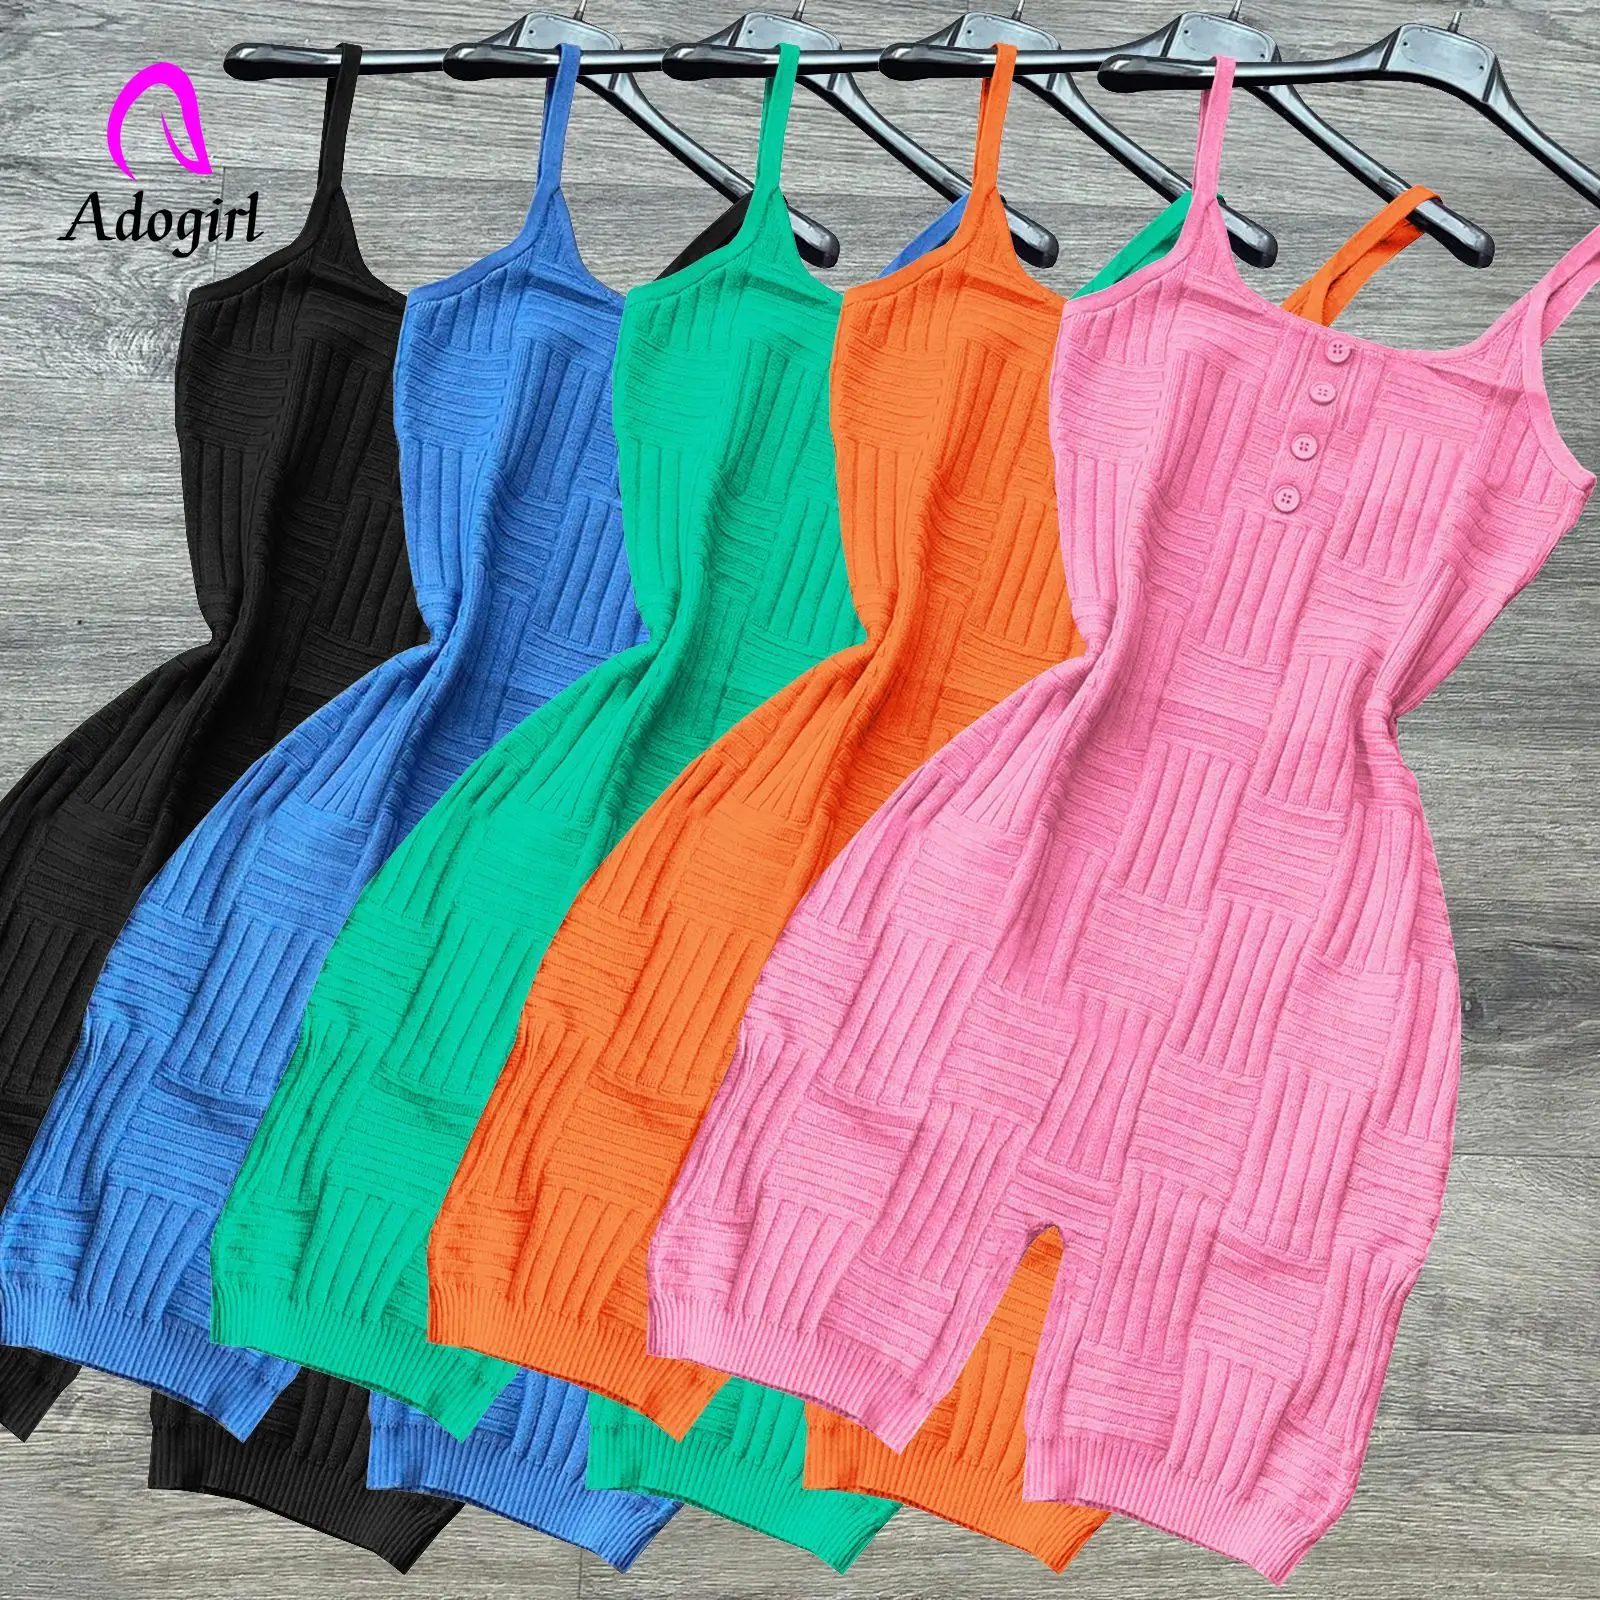 Knitted Playsuit for Women 2022 Summer Fitness Spaghetti Straps Skinny Short Jumpsuits Sexy Night Club Party One Piece Overalls 3d body print women sexy jumpsuits with sleeve covers hollow out lace up spaghetti straps slim skinny rompers club party romper